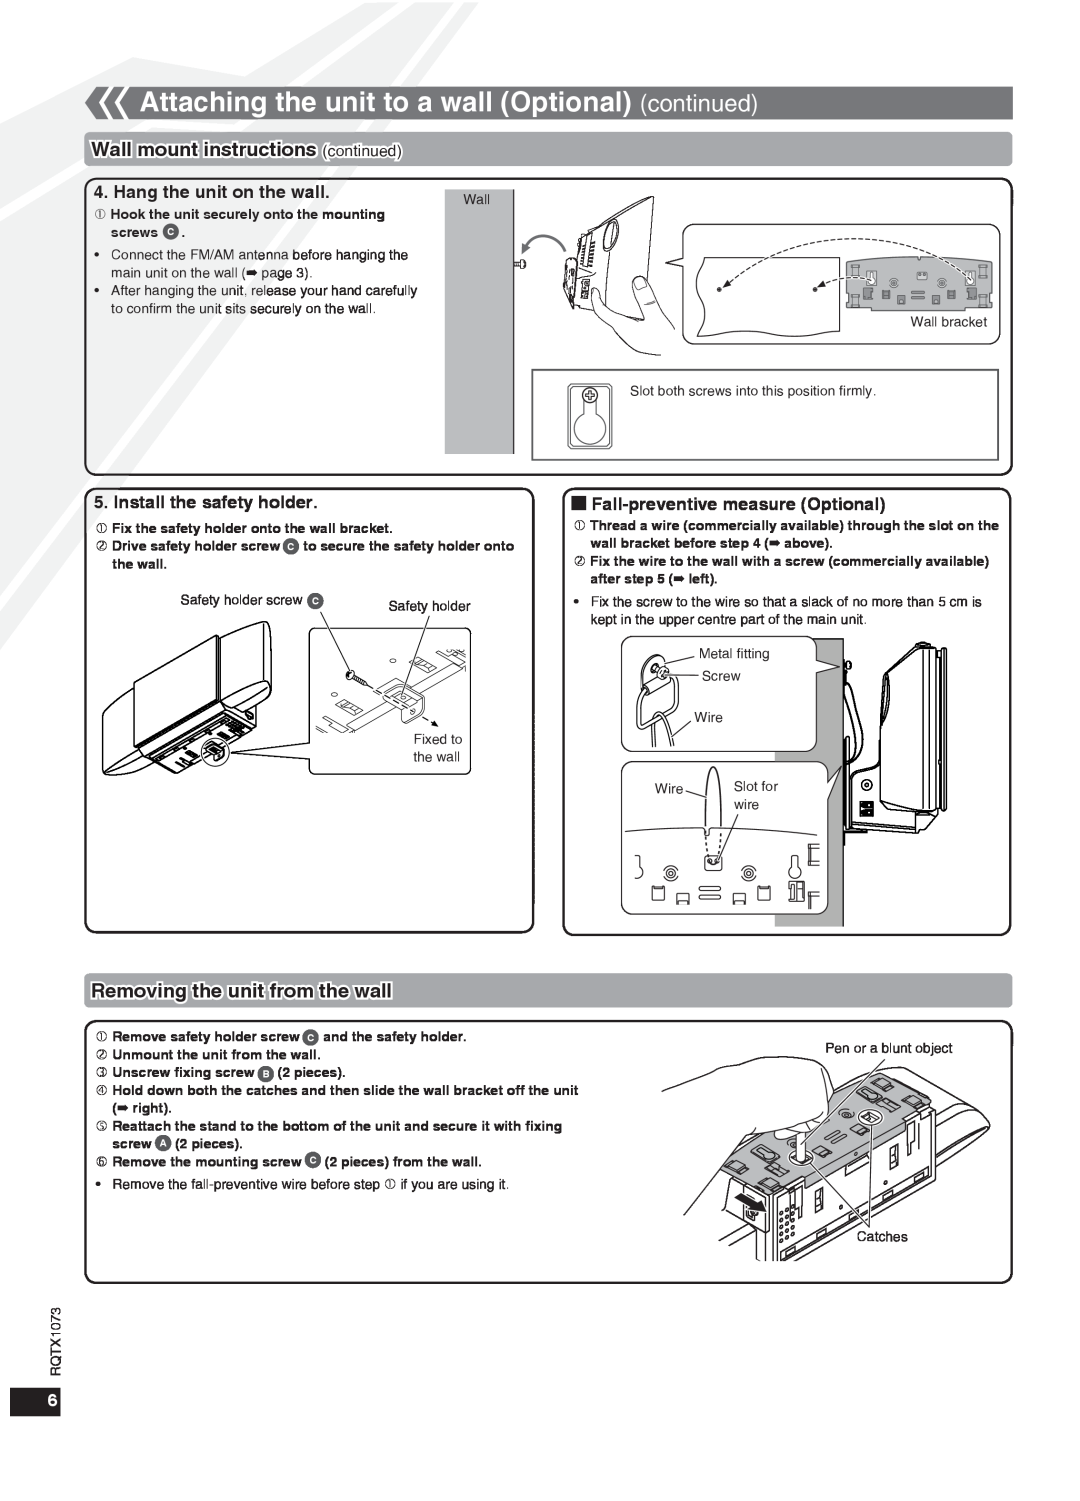 Panasonic SC-HC30 manual Wall mount instructions continued, Removing the unit from the wall, Hang the unit on the wall 